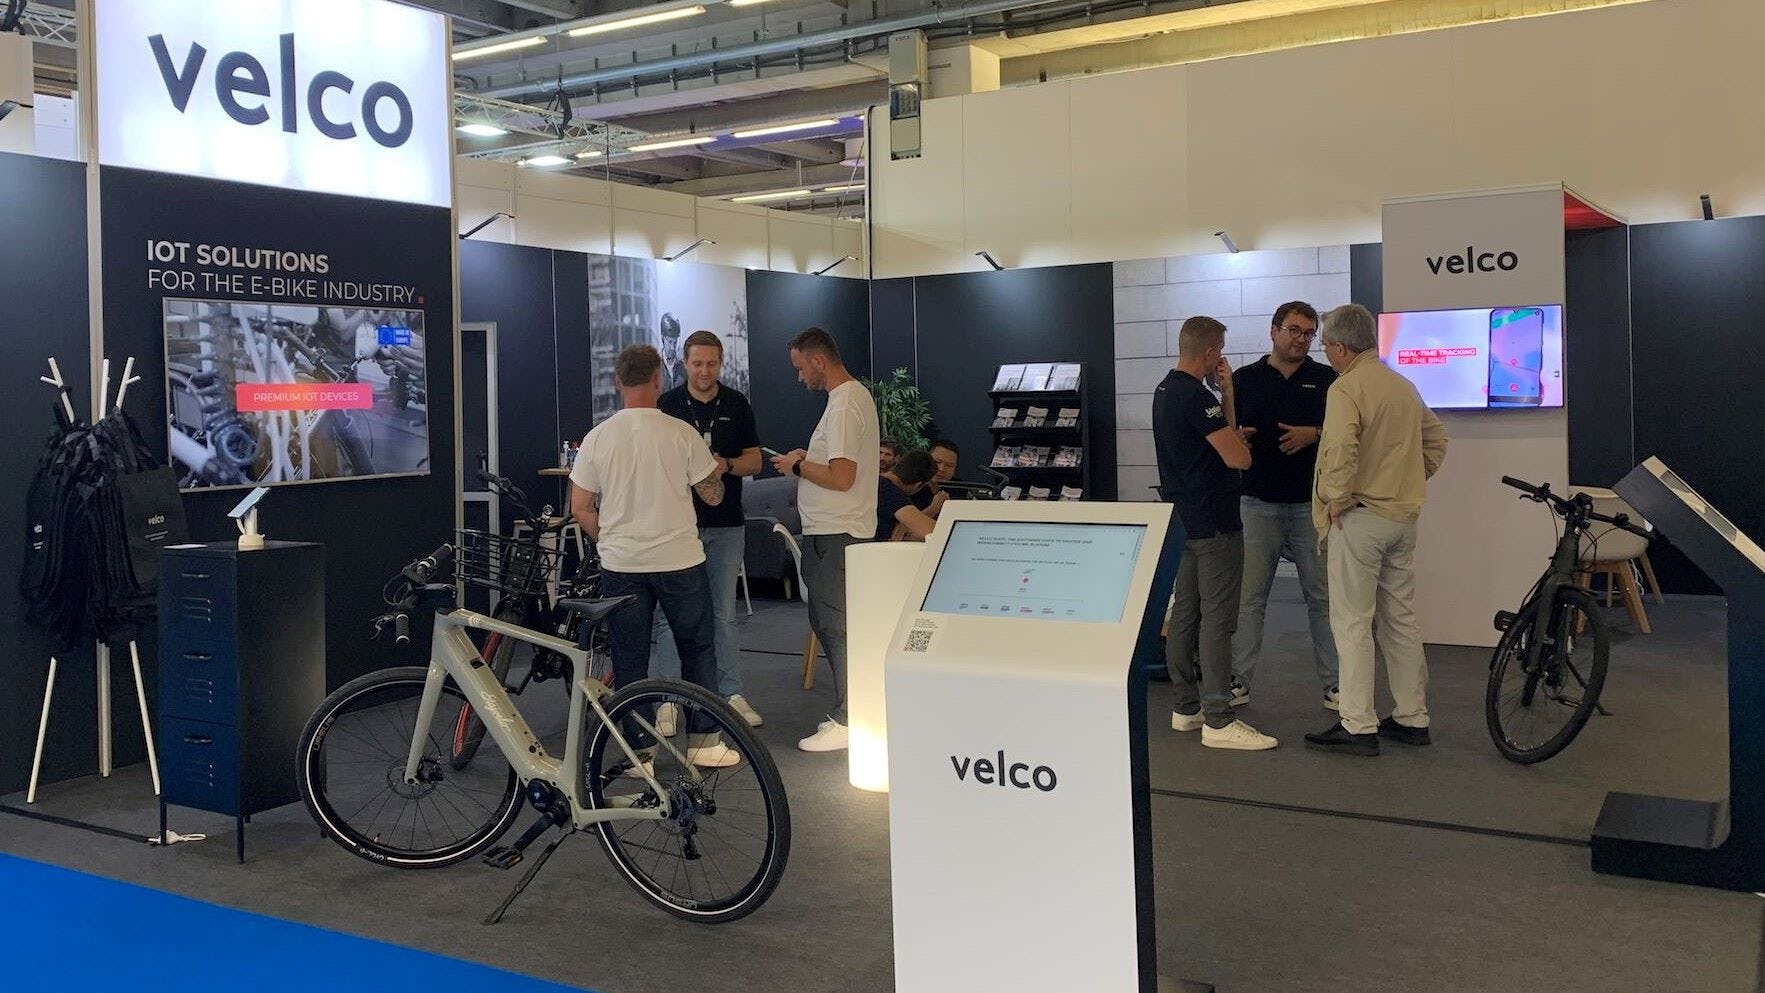 Velco adds Shimano to list of off-shelf IoT device partners